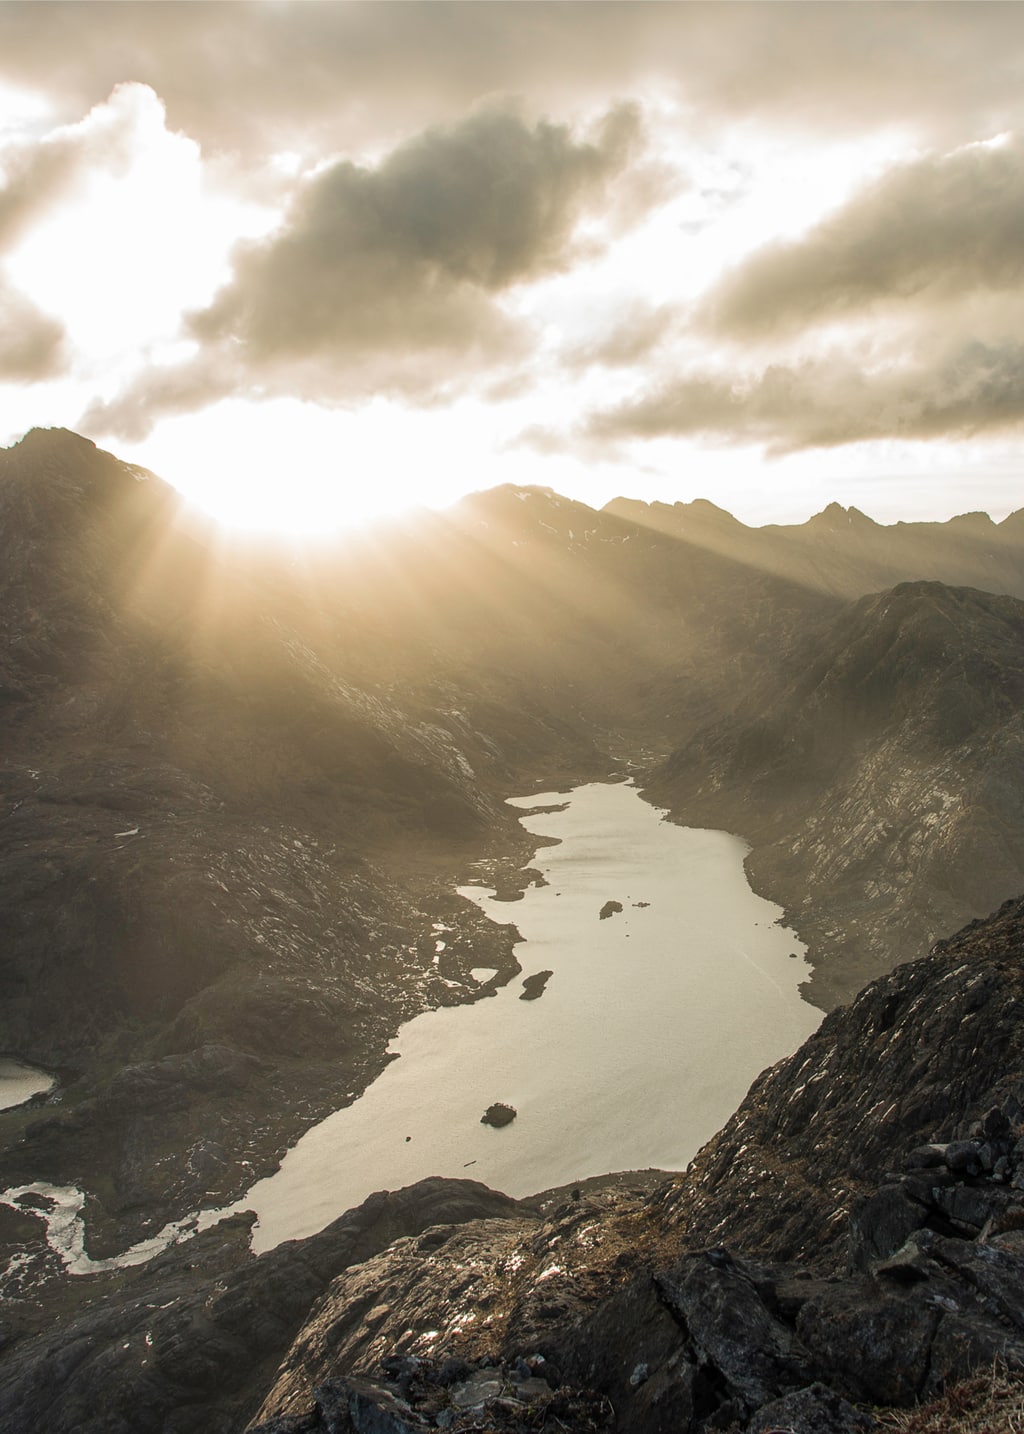 Sunset over Loch Coruisk, from the summit of Sgurr Na Stri in the Isle of Skye, Scotland